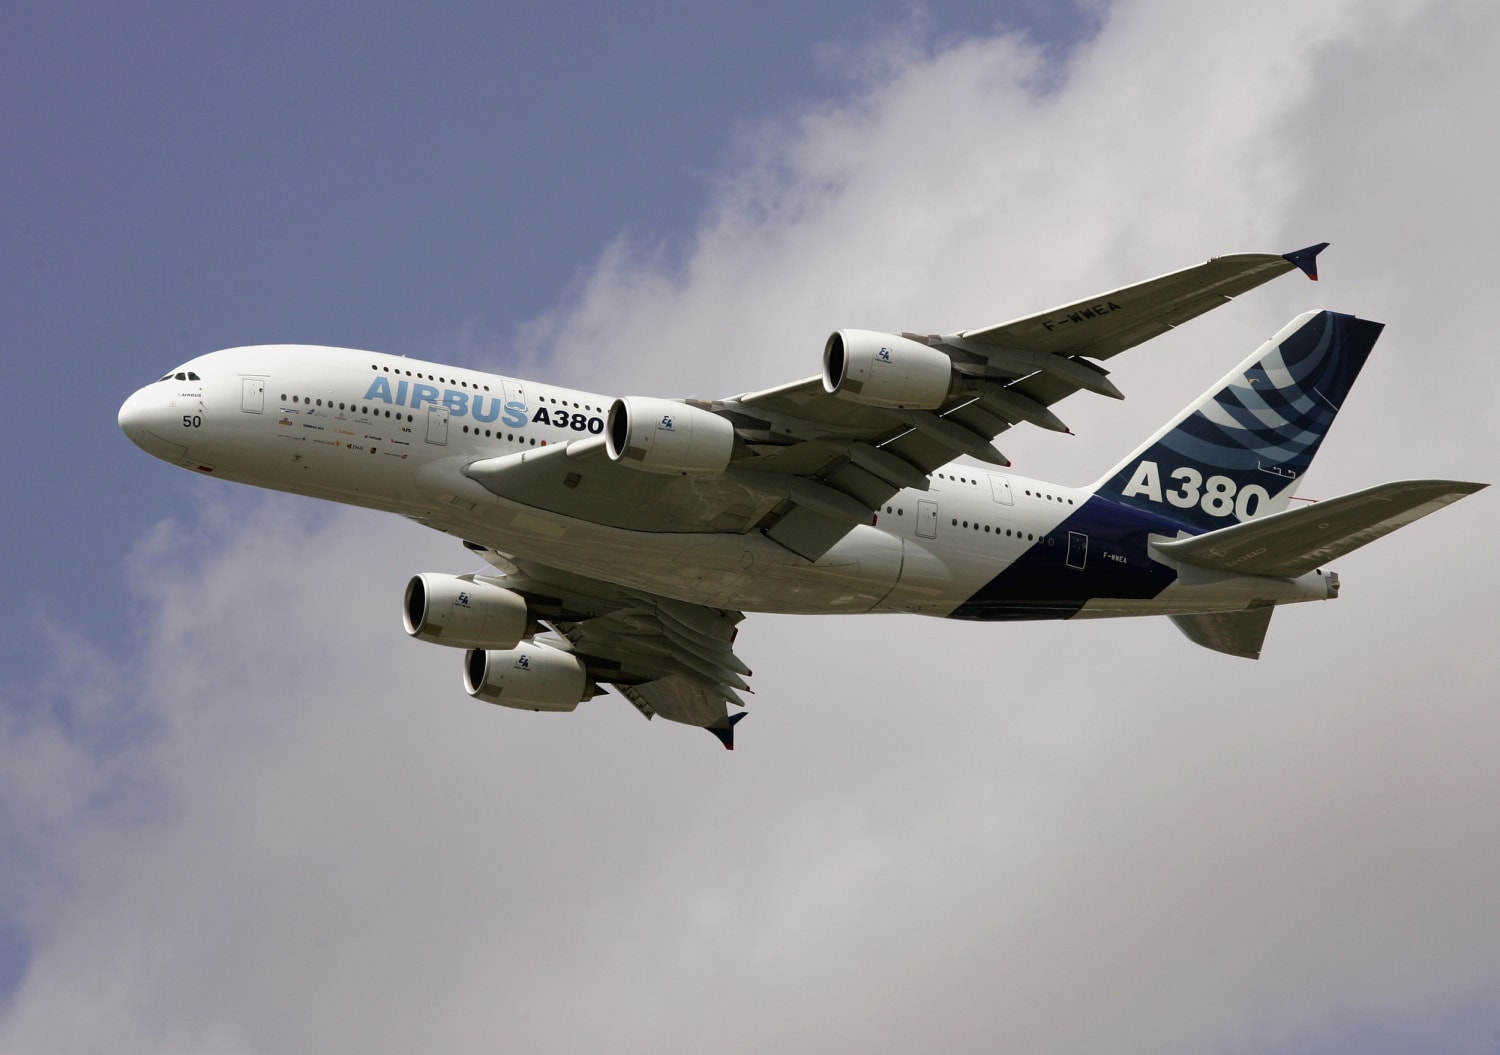 Airbus could abandon A380 superjumbo without Emirates deal